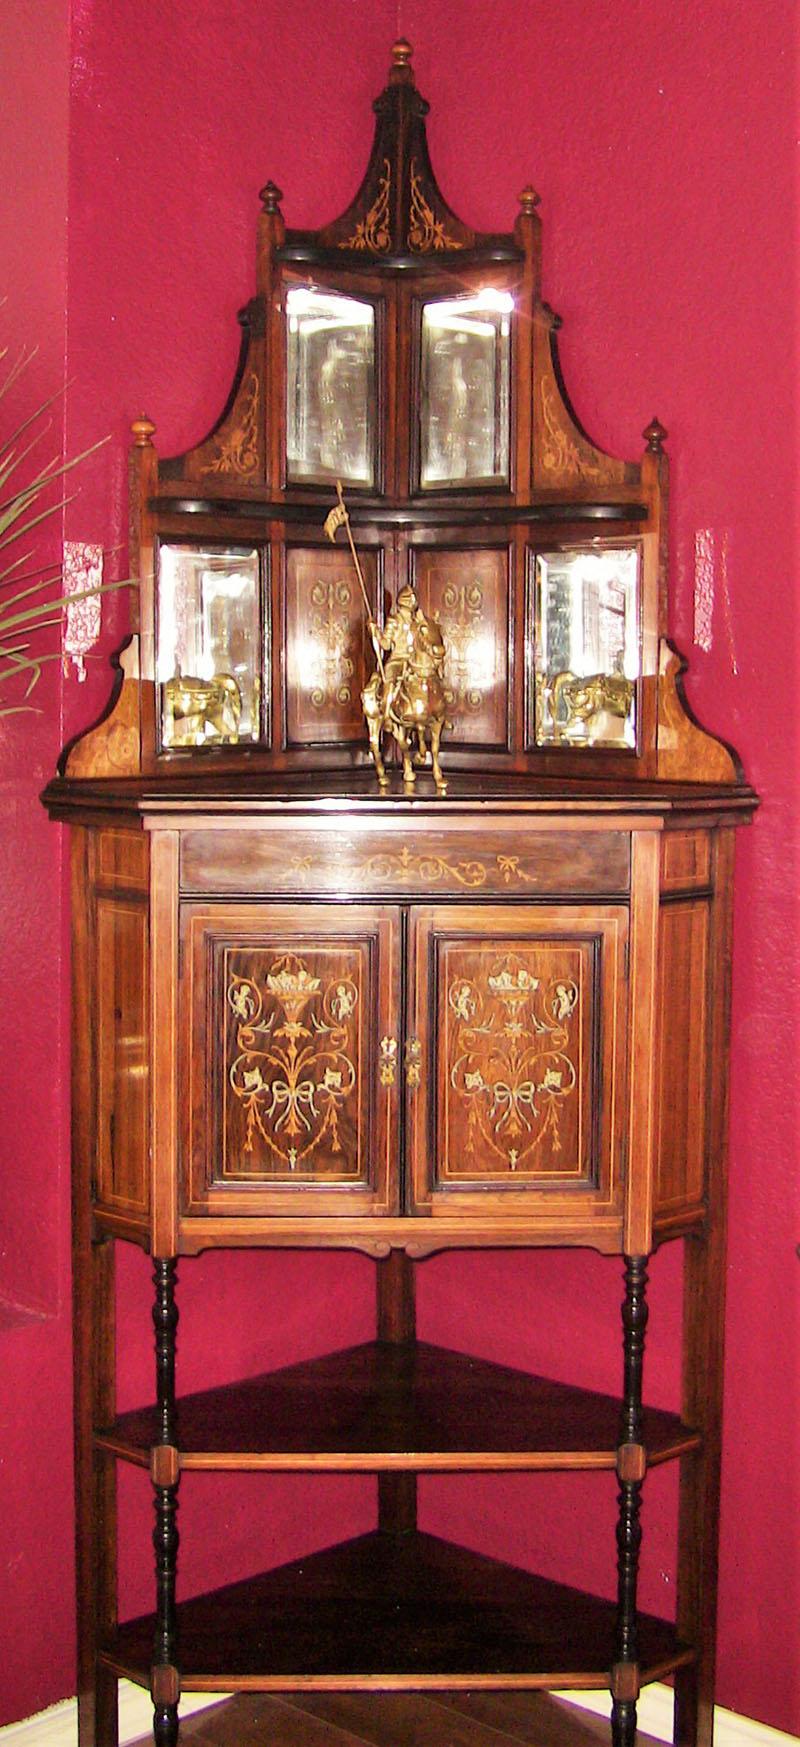 19C English Marquetry Inlaid Corner Cabinet Attributed to Collinson and Lock For Sale 3